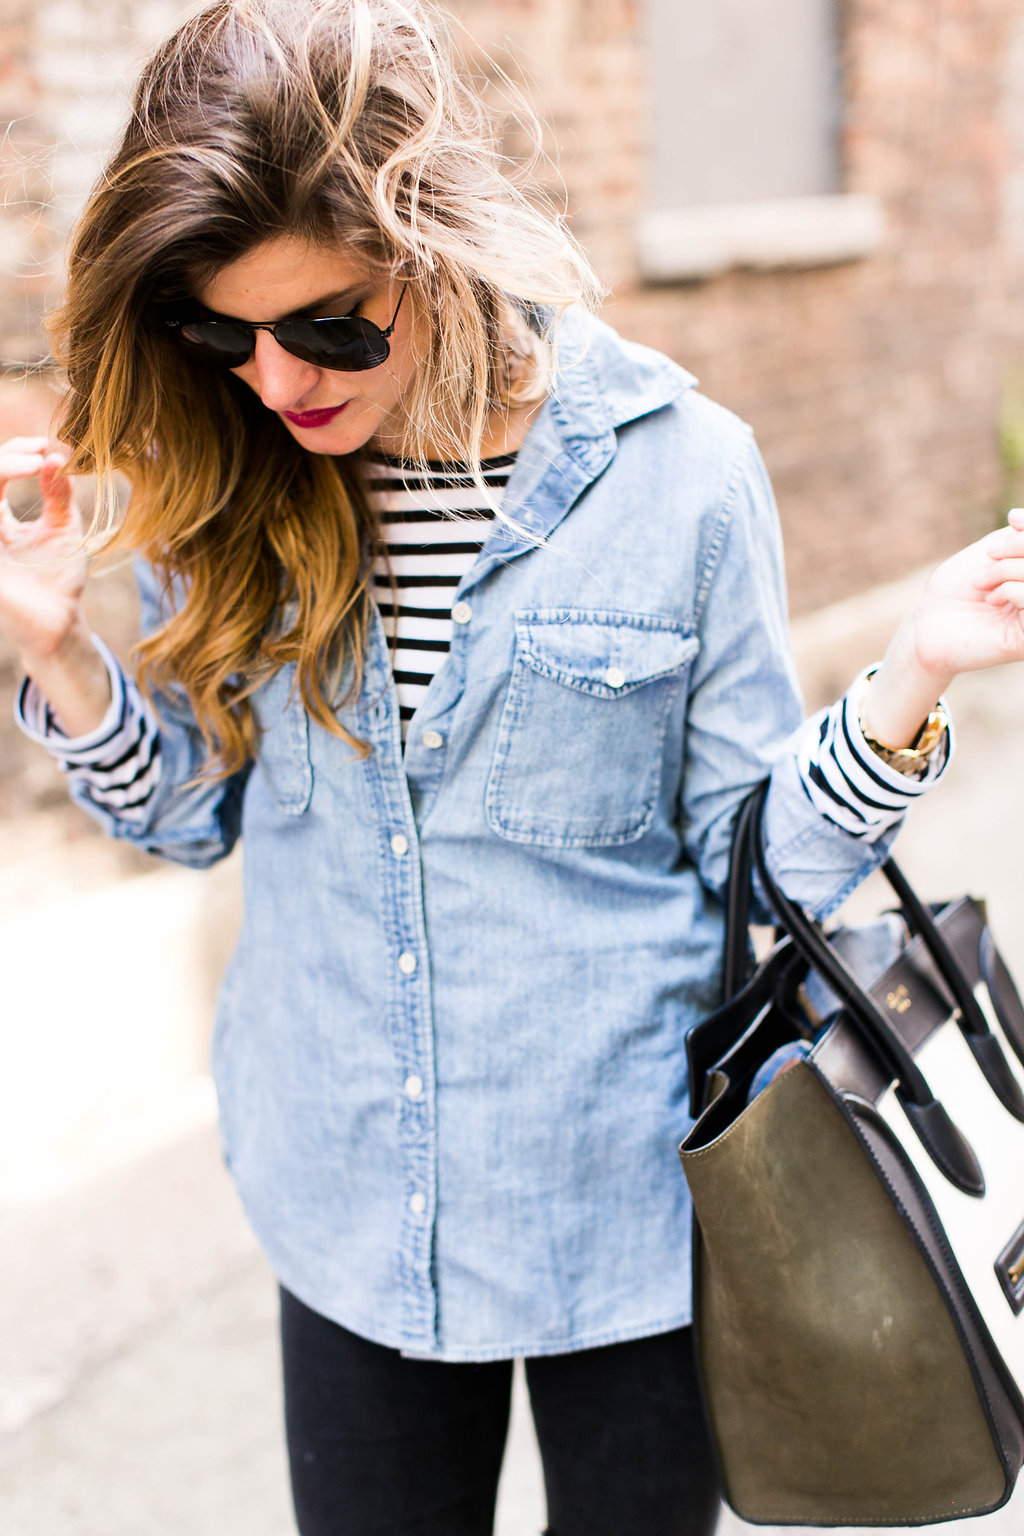 Navy Denim Shirt with Black Leggings Outfits (13 ideas & outfits)